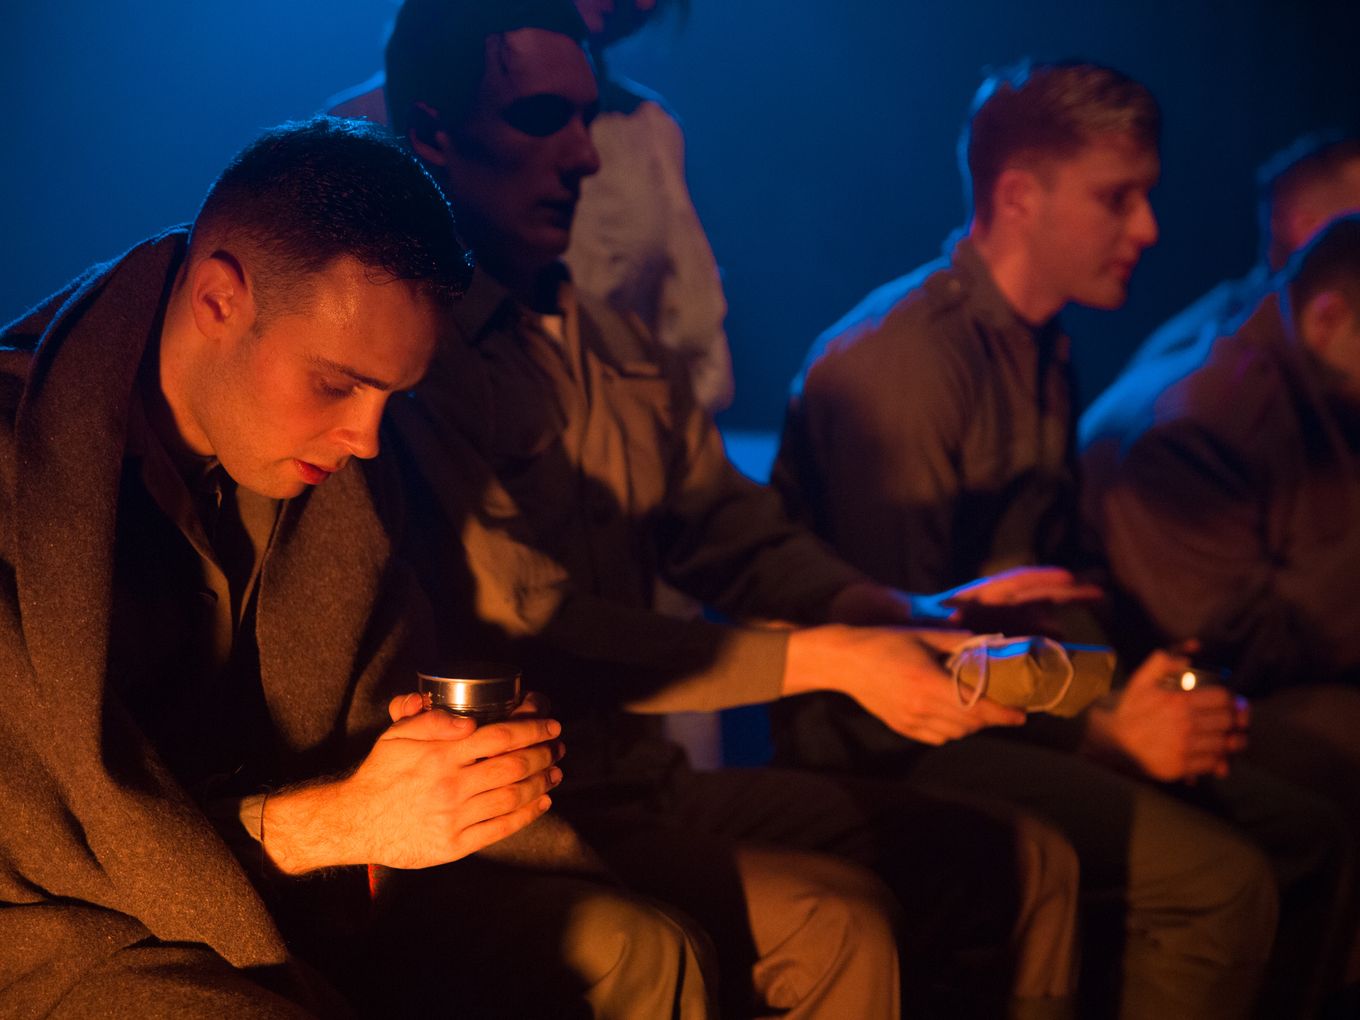 Actors dressed as soldiers huddle in a deep orange light with a cold dark backdrop